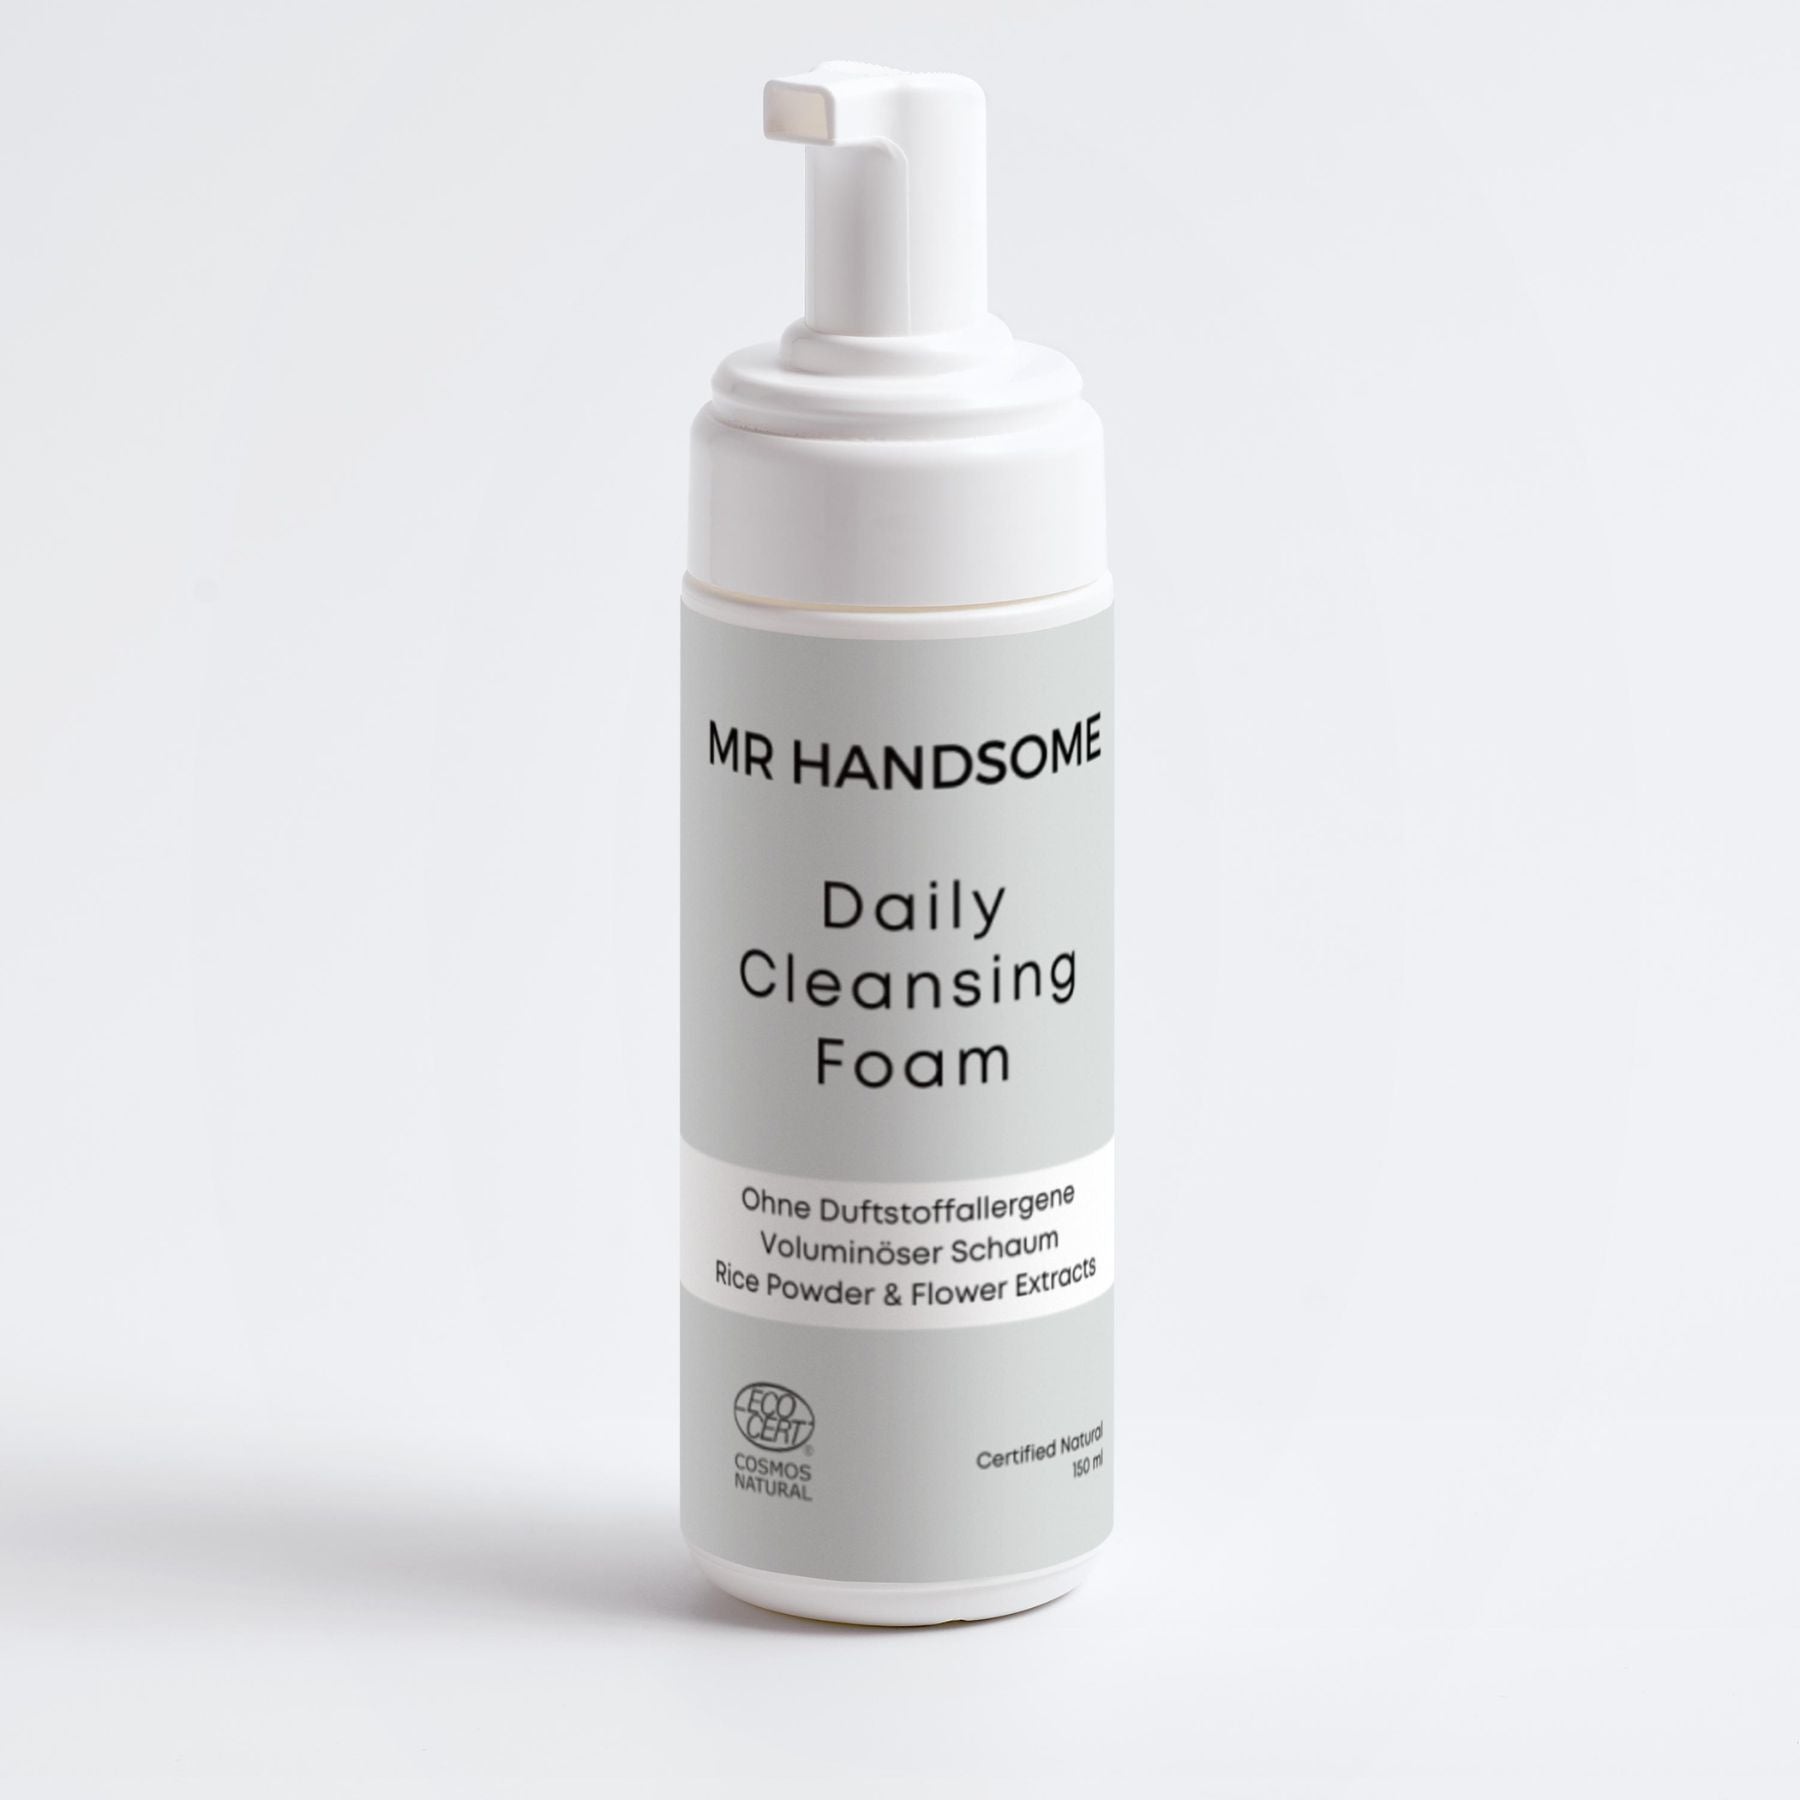 Mr Handsome Daily Cleansing Foam